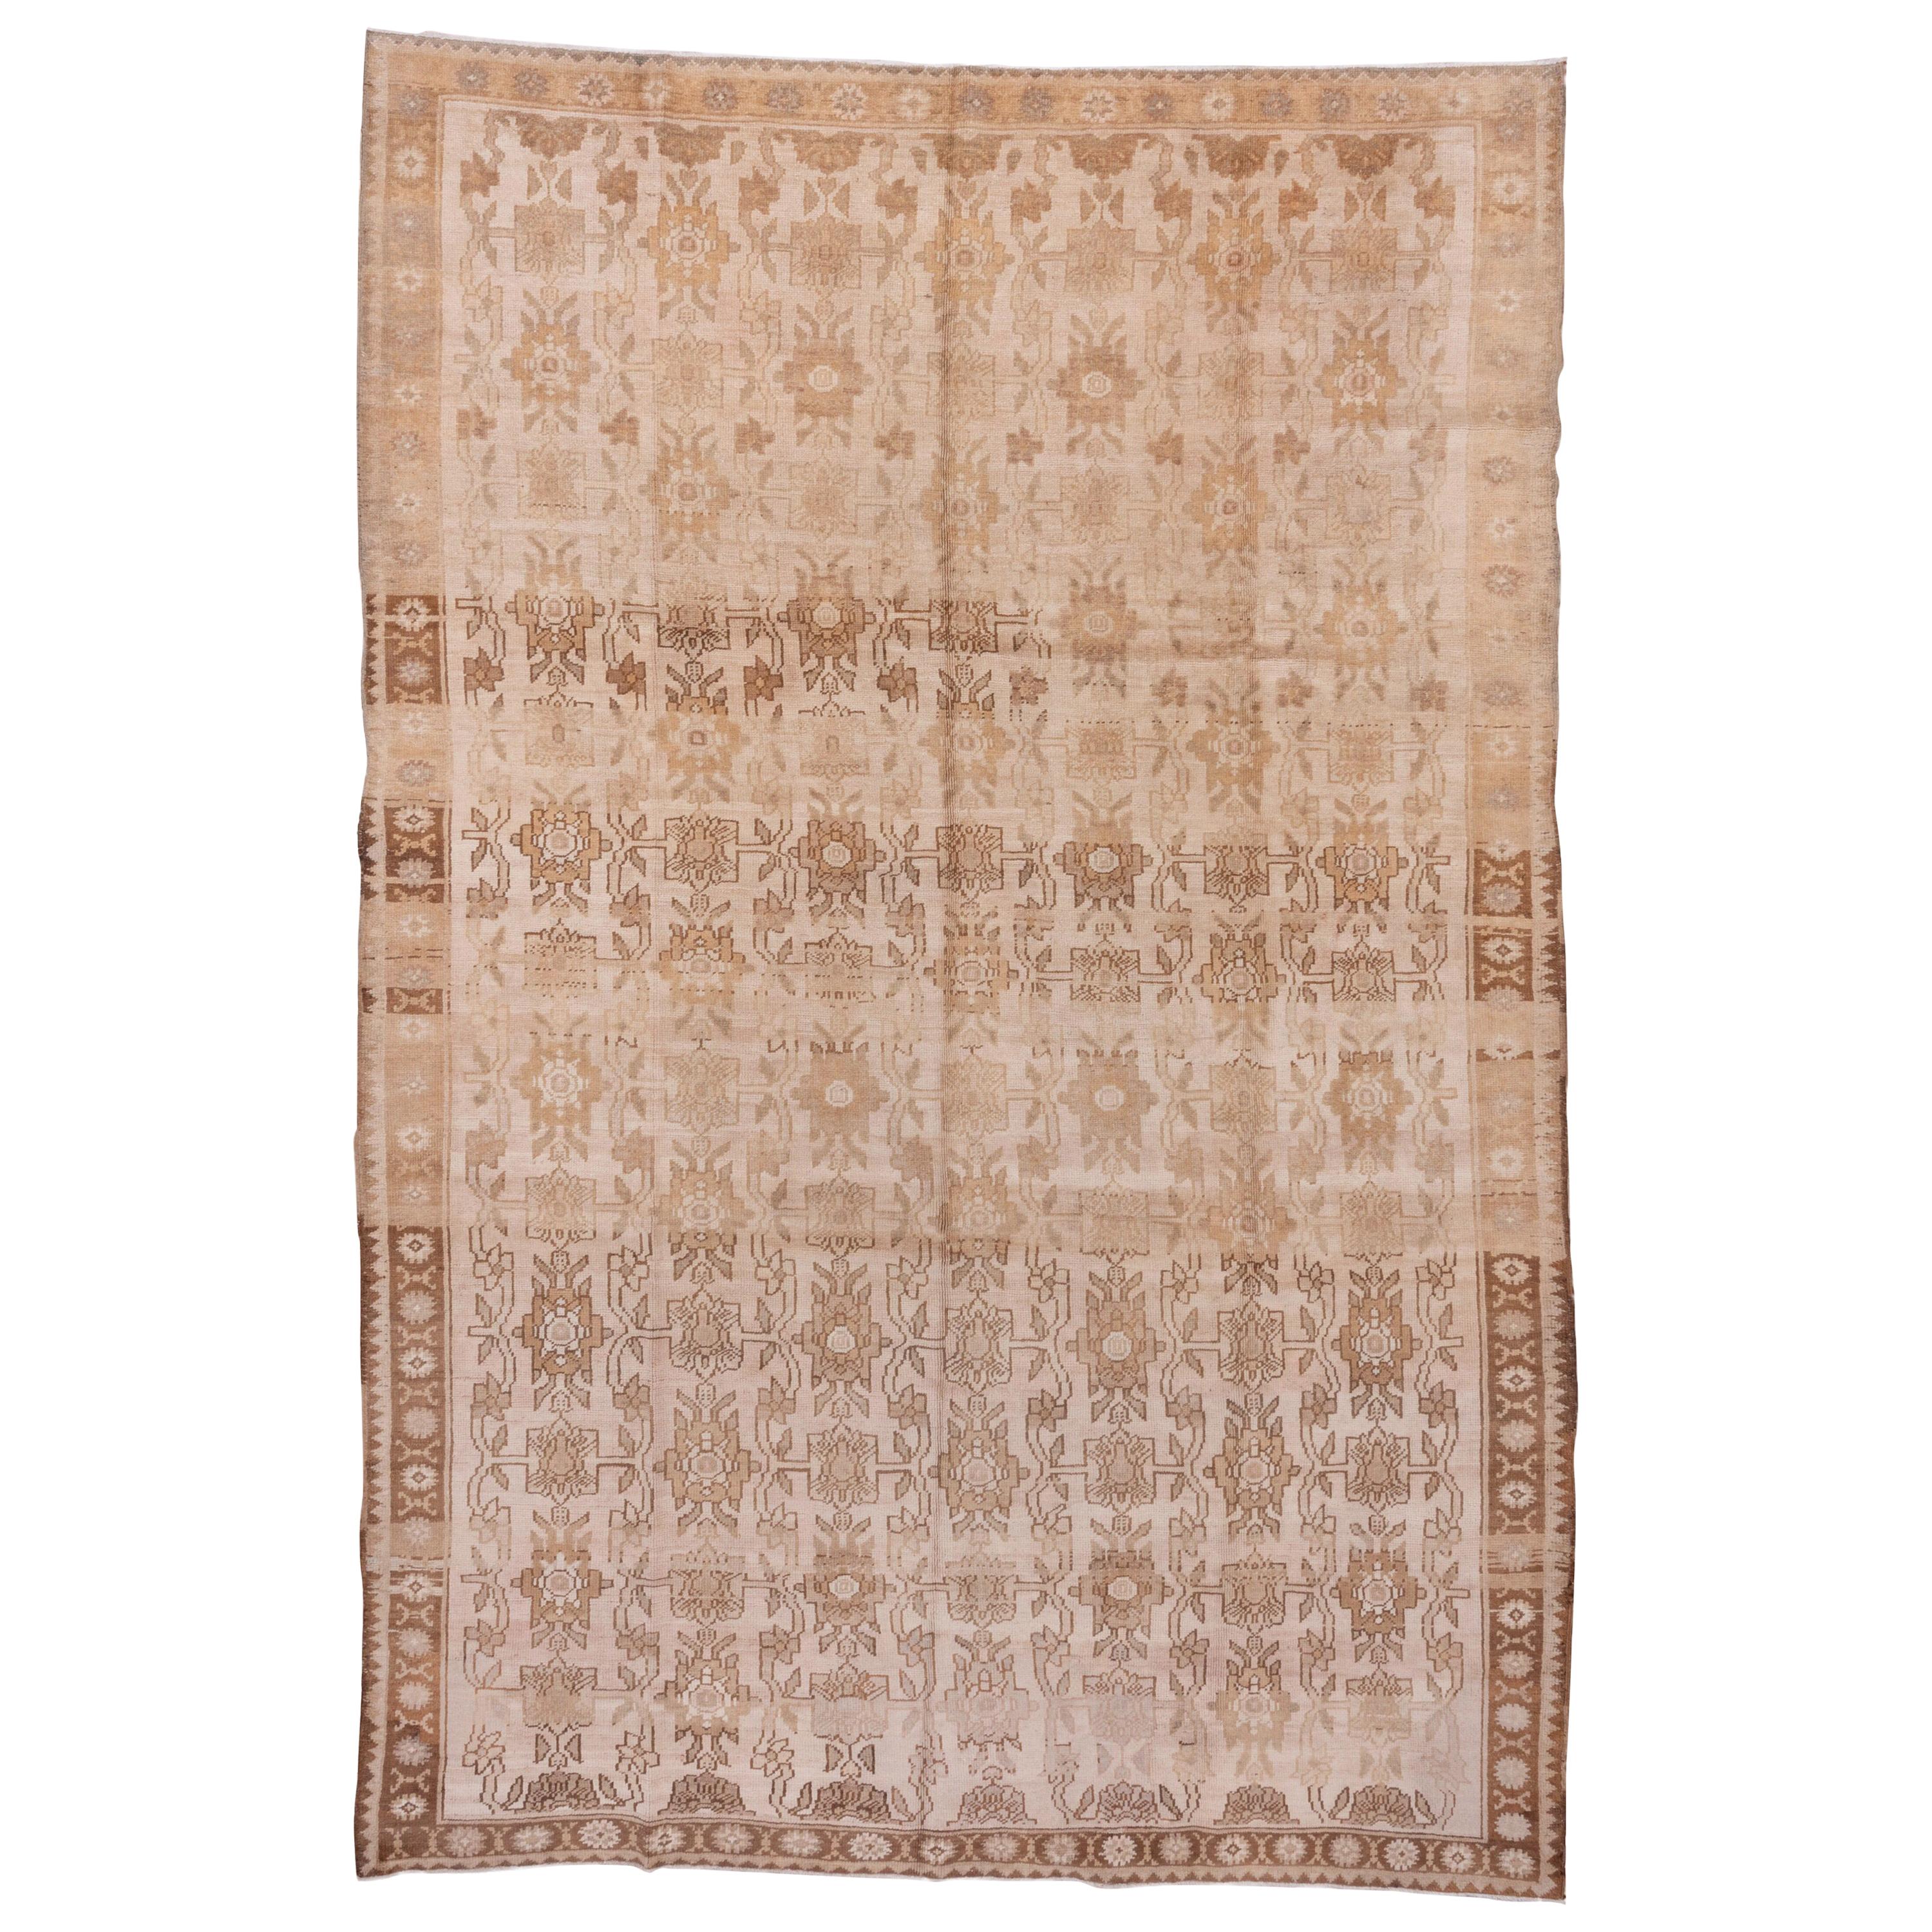 Unusual Neutral Turkish Oushak Rug, All-Over Field, Brown Tones, circa 1940s